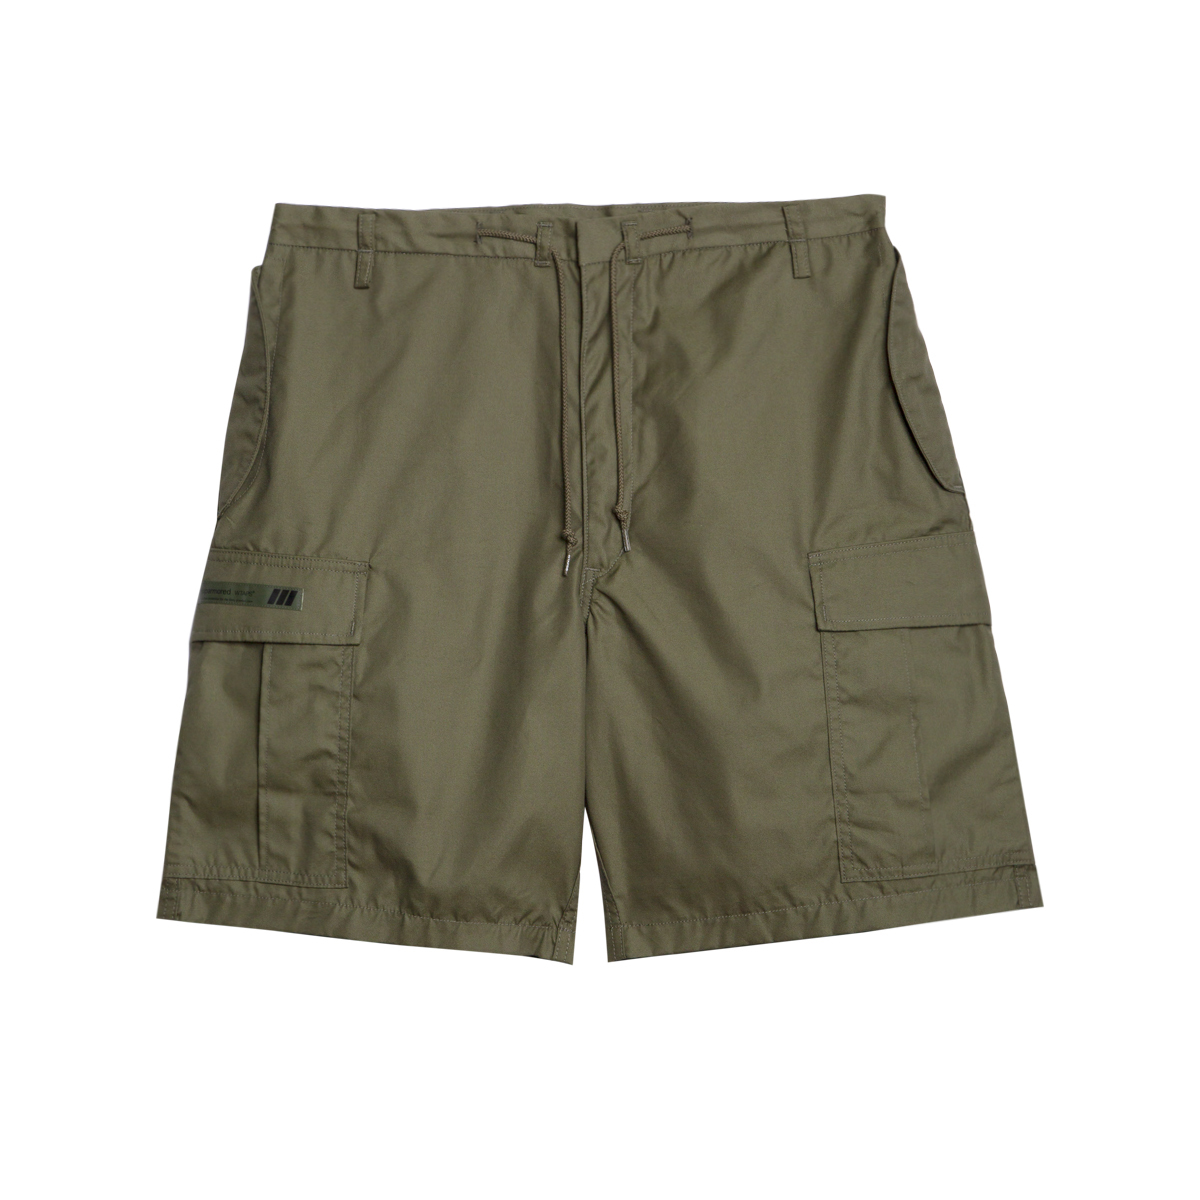 WTAPS : MILS0001 / SHORTS / NYCO. OXFORD – BELIEF MOSCOW